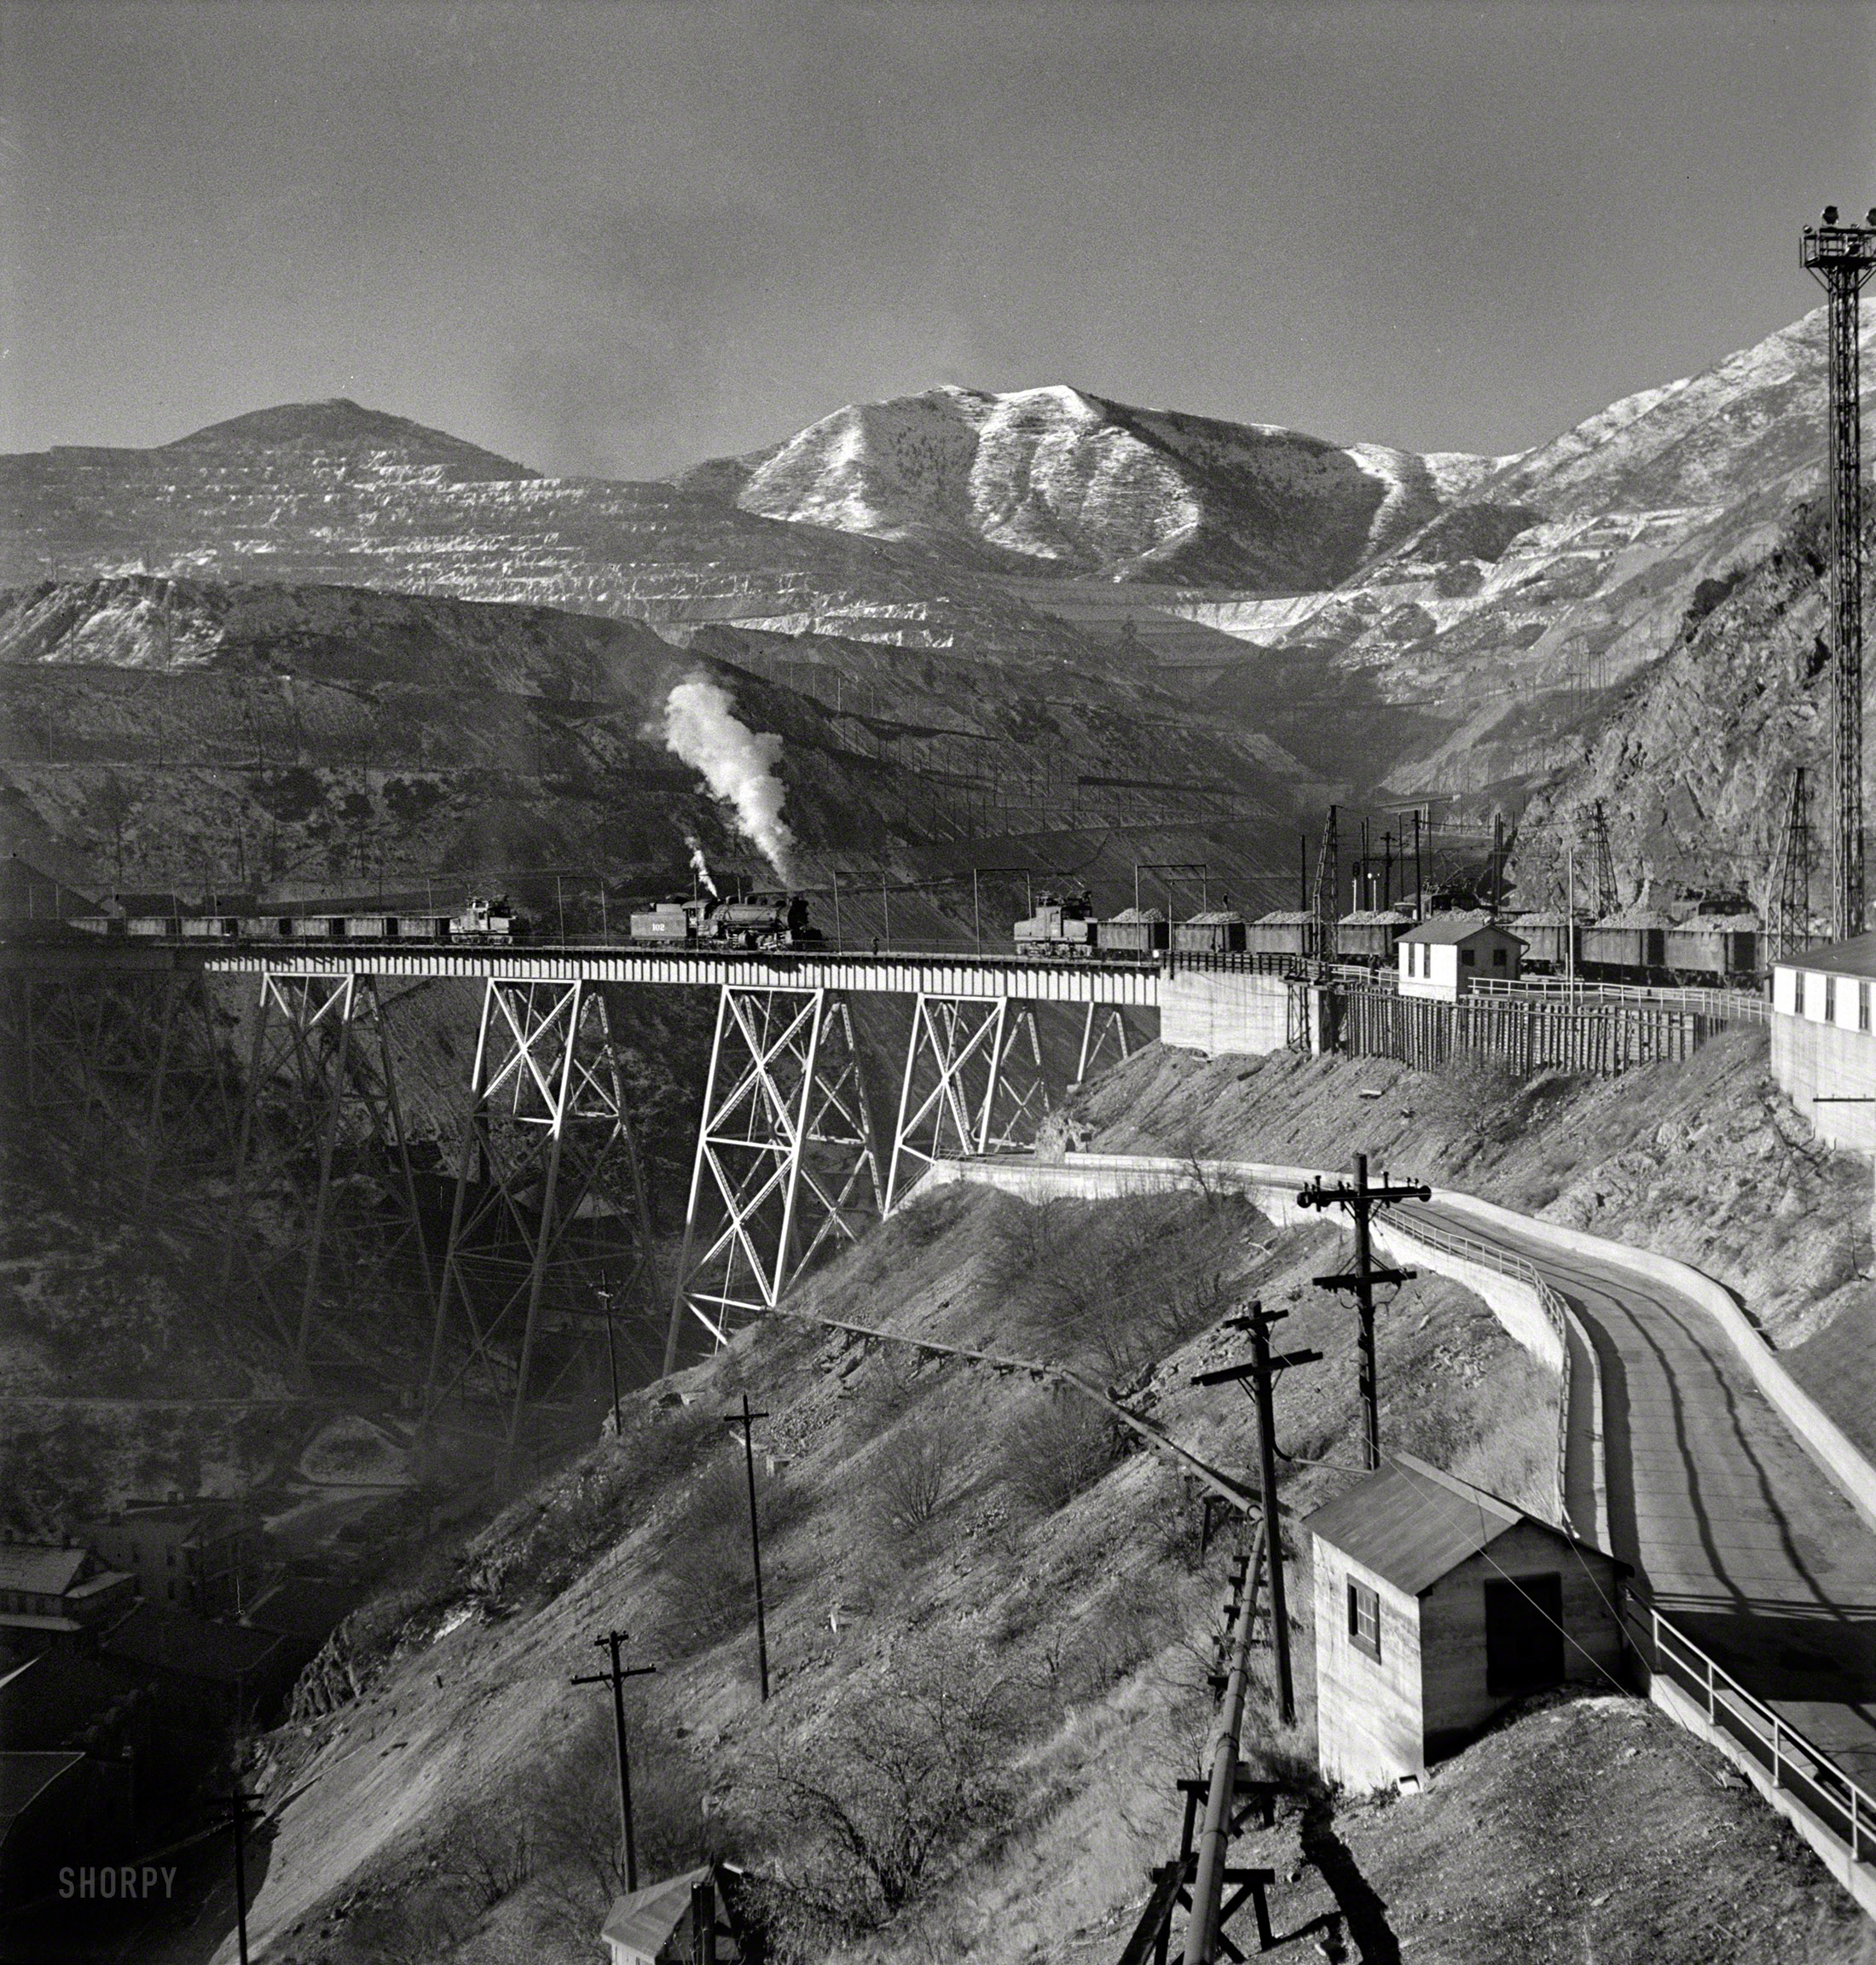 November 1942. "Bingham Canyon, Utah. Ore trains on a trestle bridge above an open-pit mine of the Utah Copper Company." Photo by Andreas Feininger for the Office of War Information. View full size.